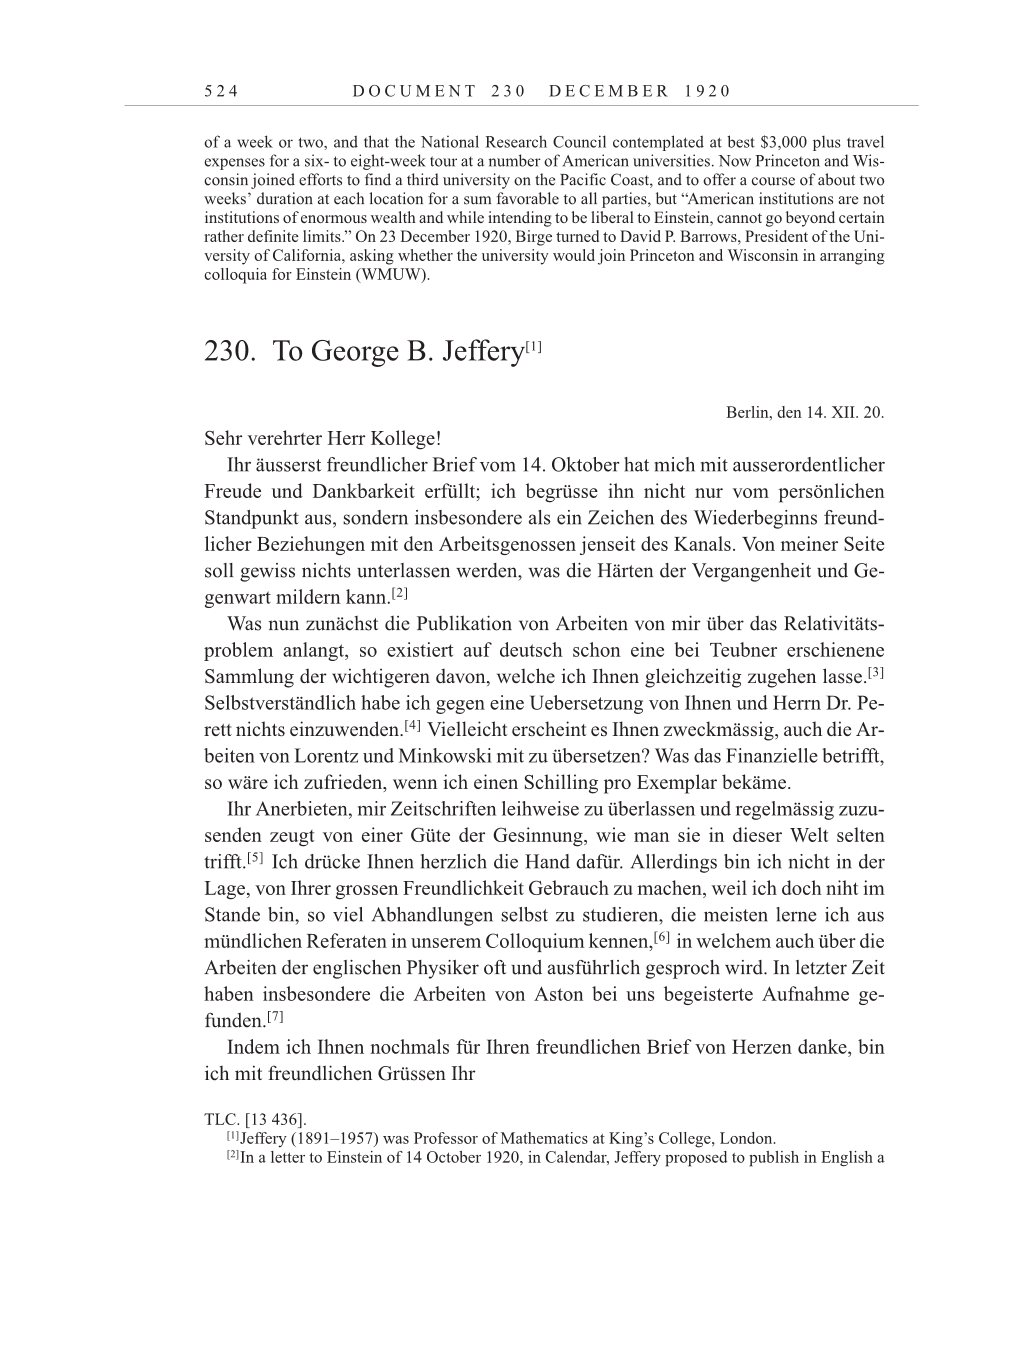 Volume 10: The Berlin Years: Correspondence May-December 1920 / Supplementary Correspondence 1909-1920 page 524